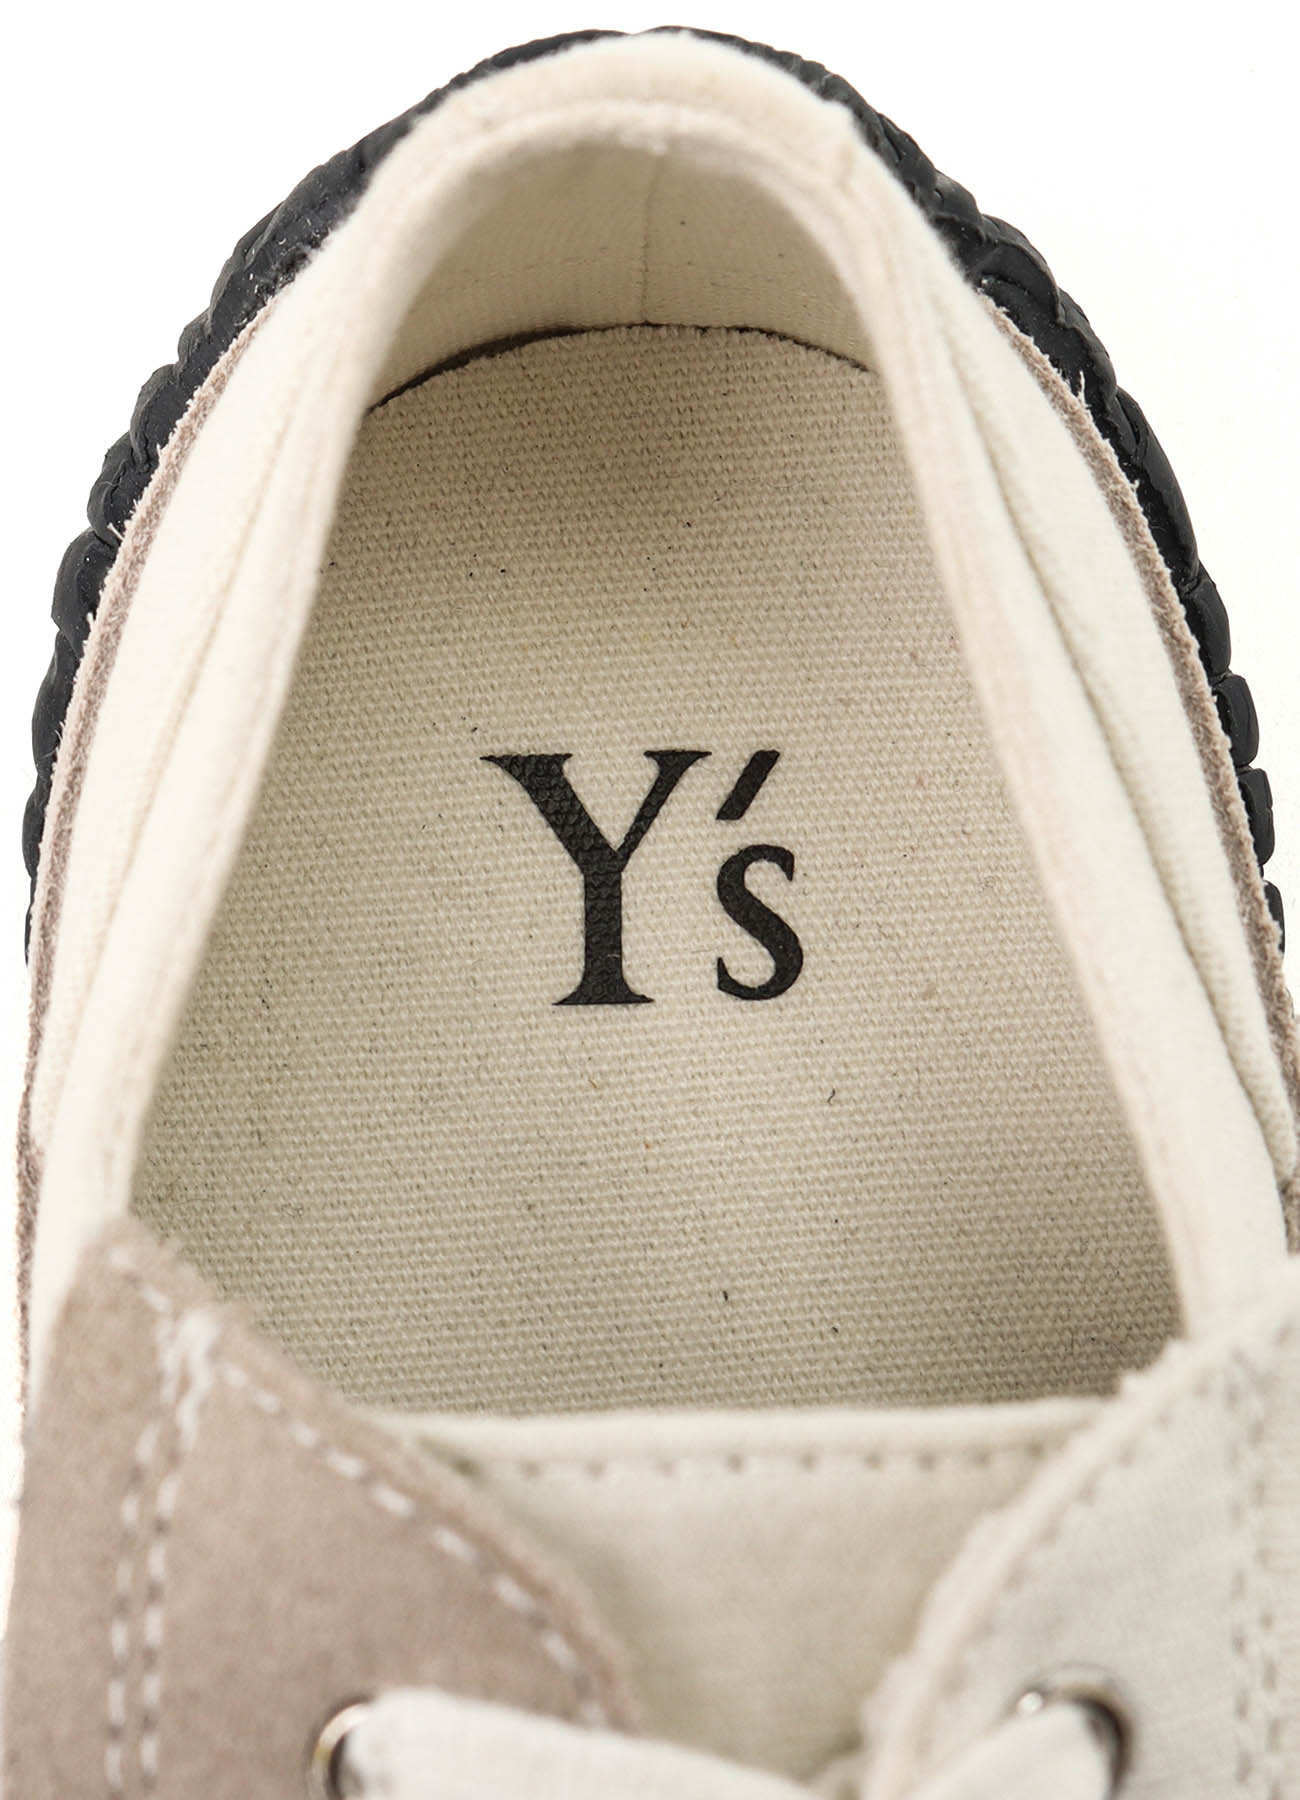 【8/2 12:00(JST) Release】CANVAS/SMOOTH LEATHER/VELOR LOW CUT SNEAKER